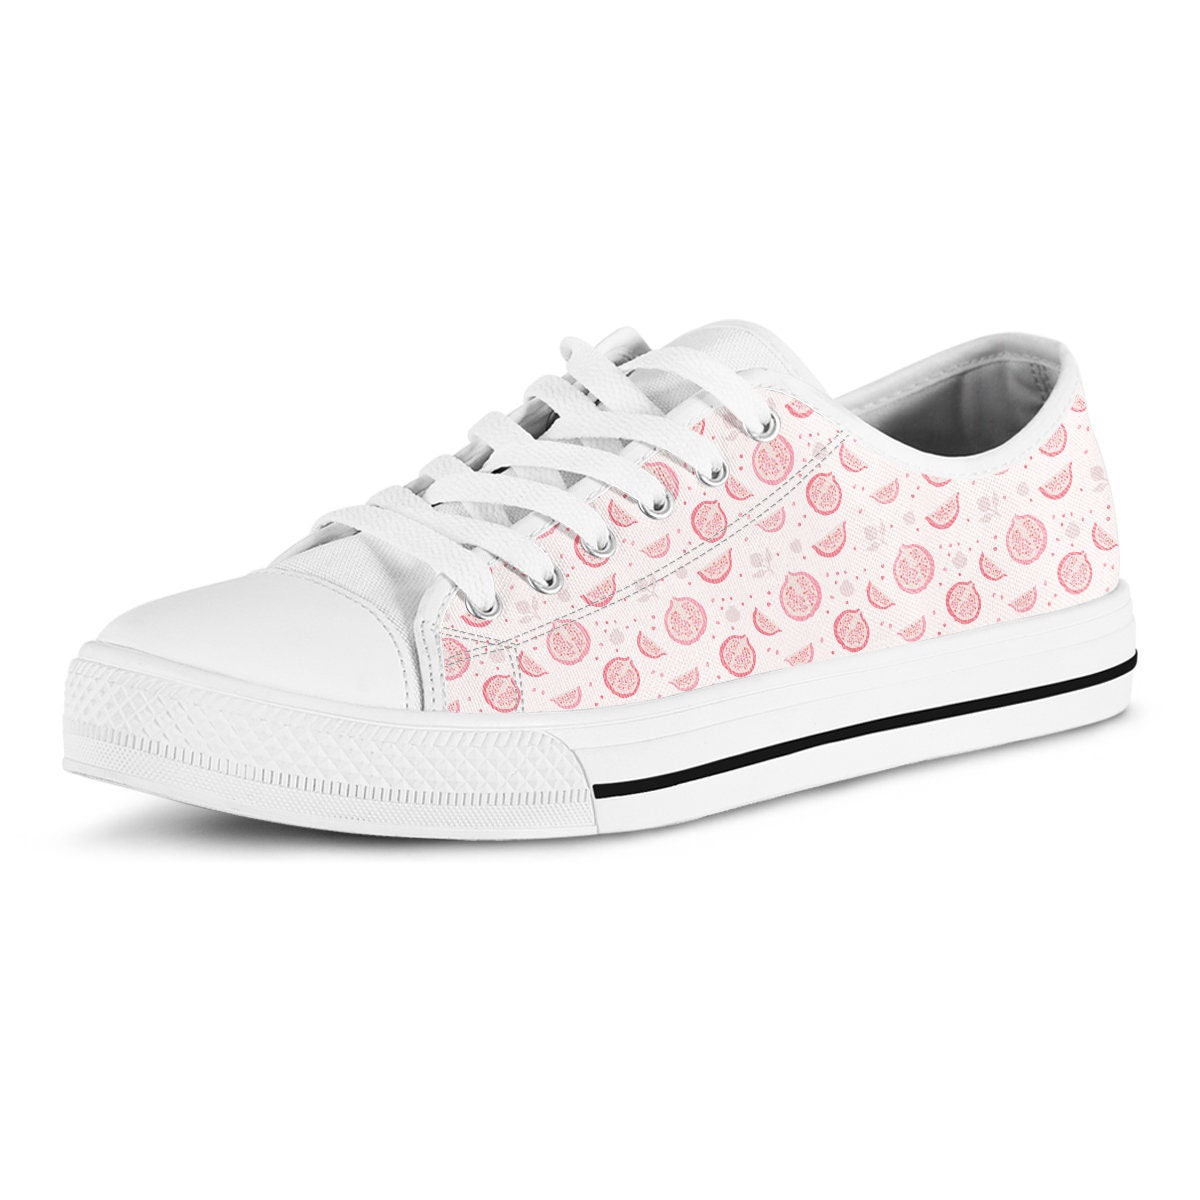 Pomegranate Low Top Shoes, Custom Fruits Shoes, Pomegranate Women Sneakers, Cute Sneakers, Kids Sneakers, Women, Men Or Kids Sneakers